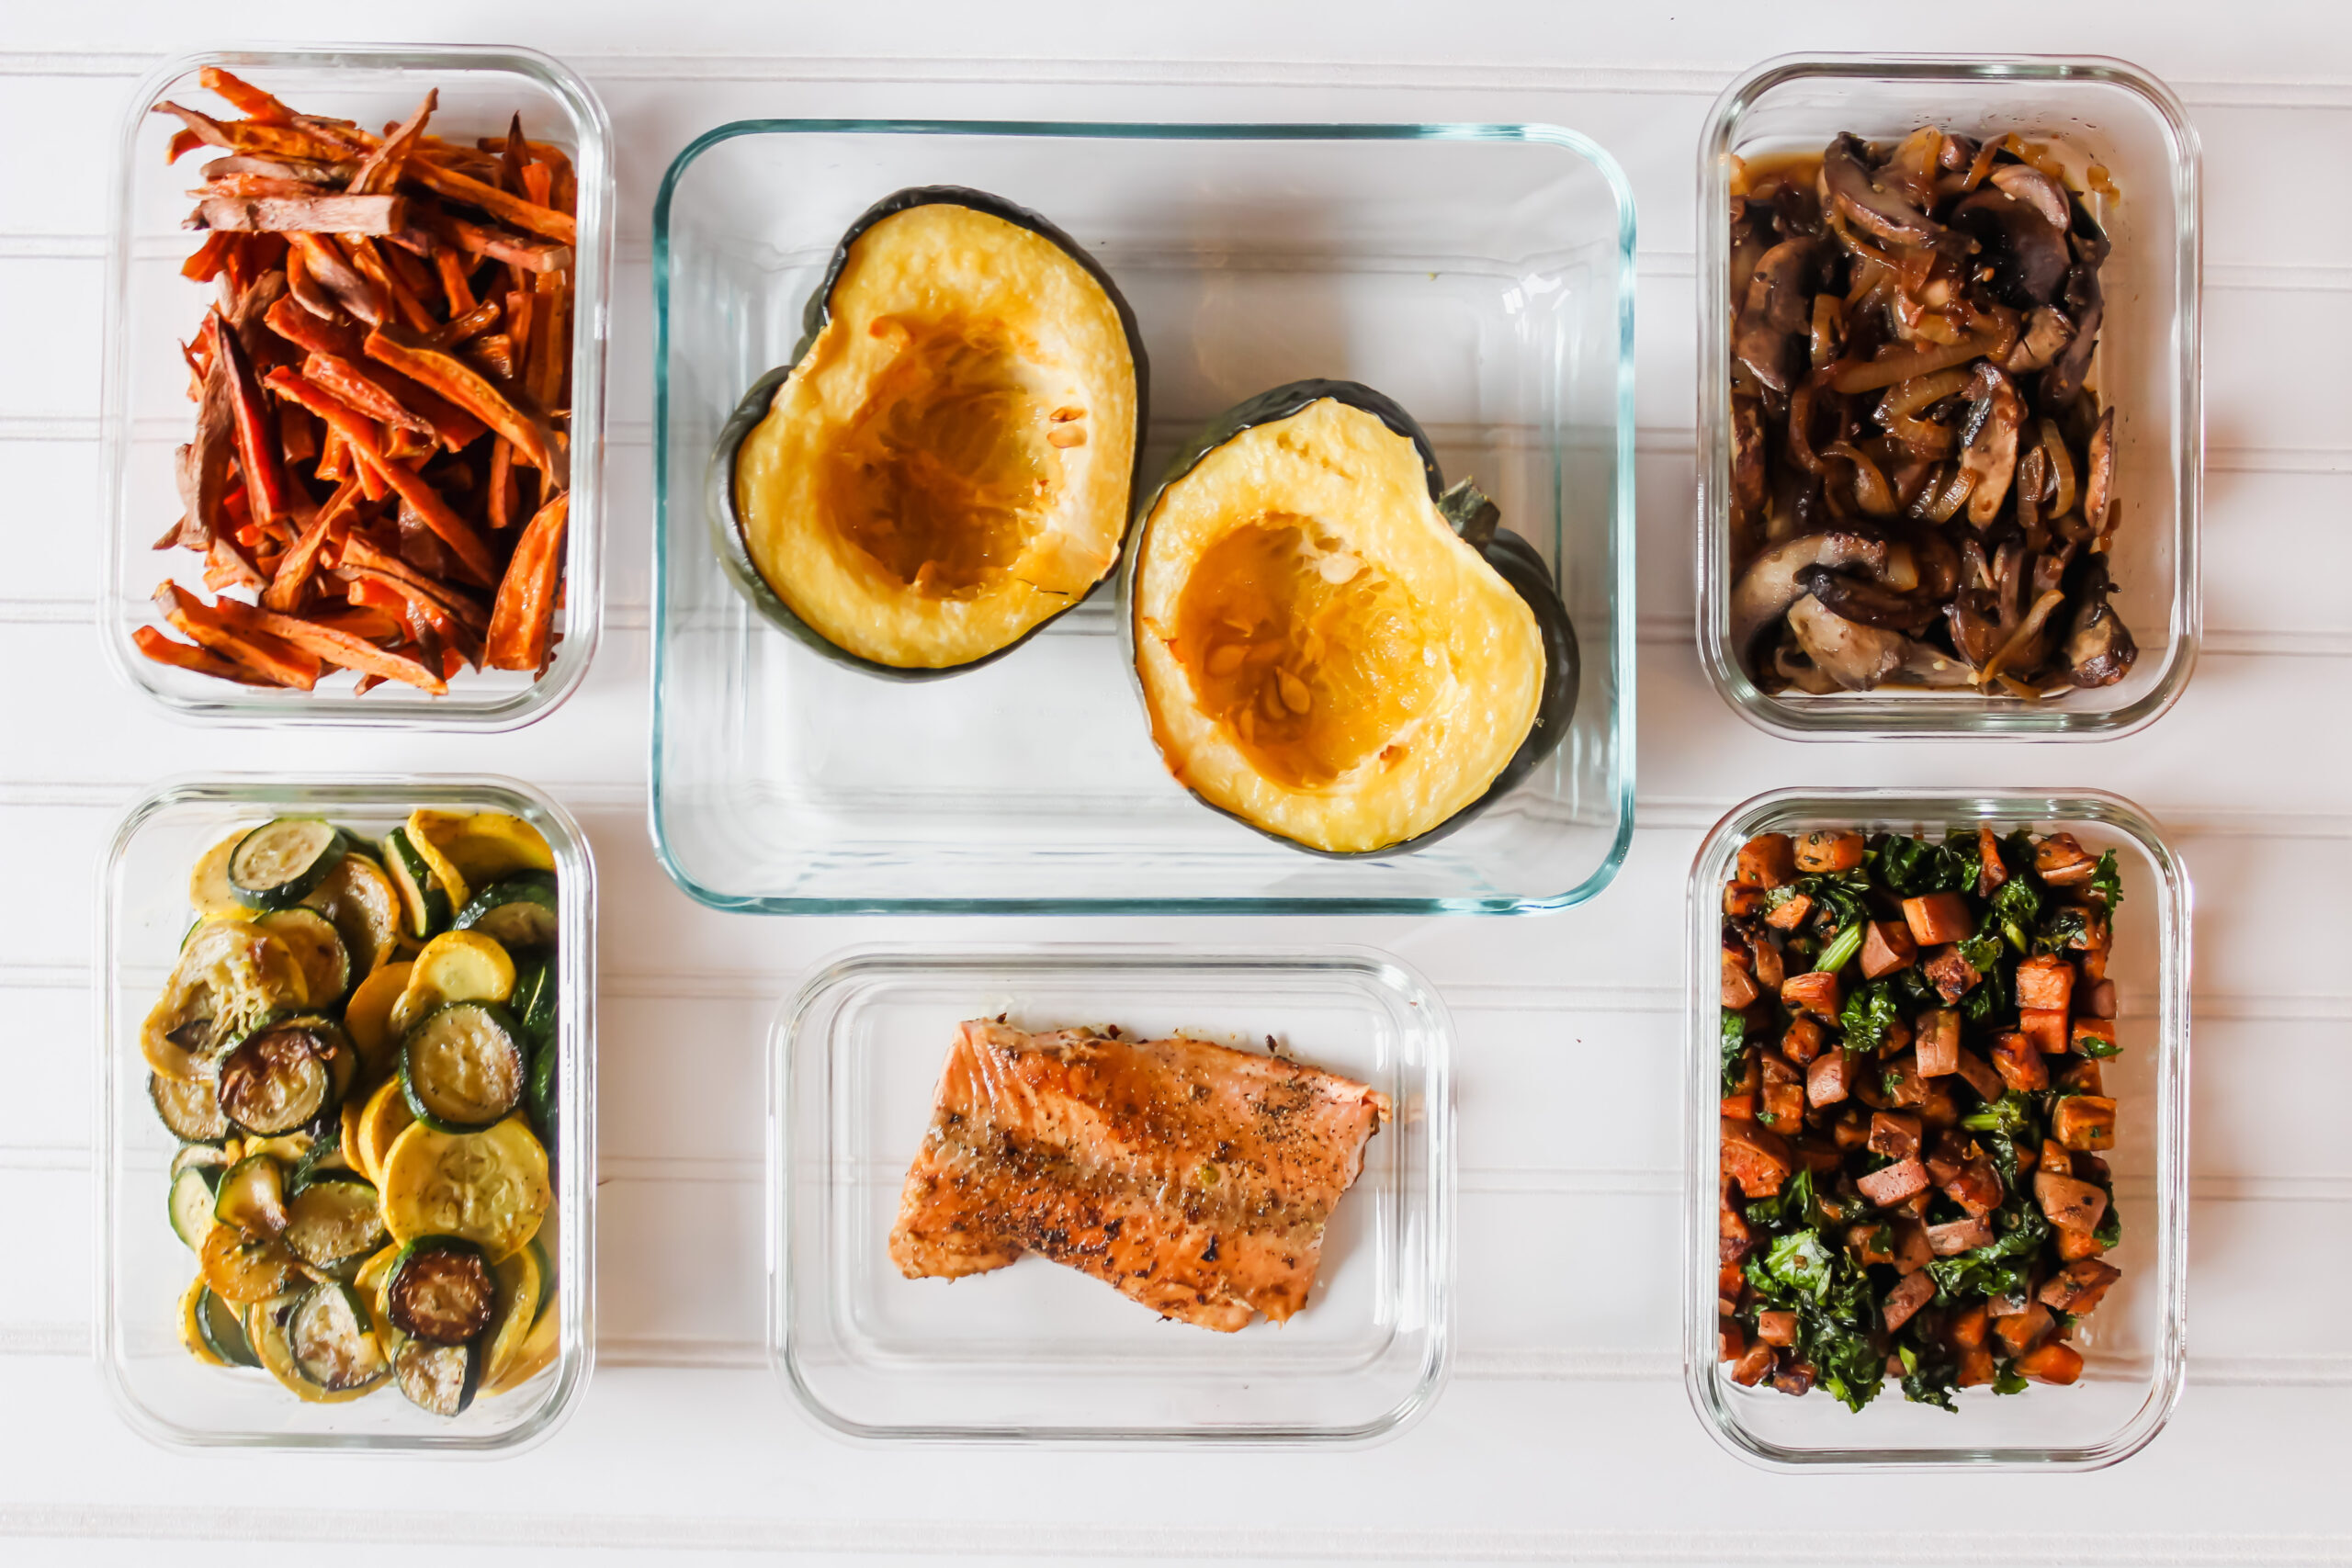 5 Meal Prepping Tips for Beginners